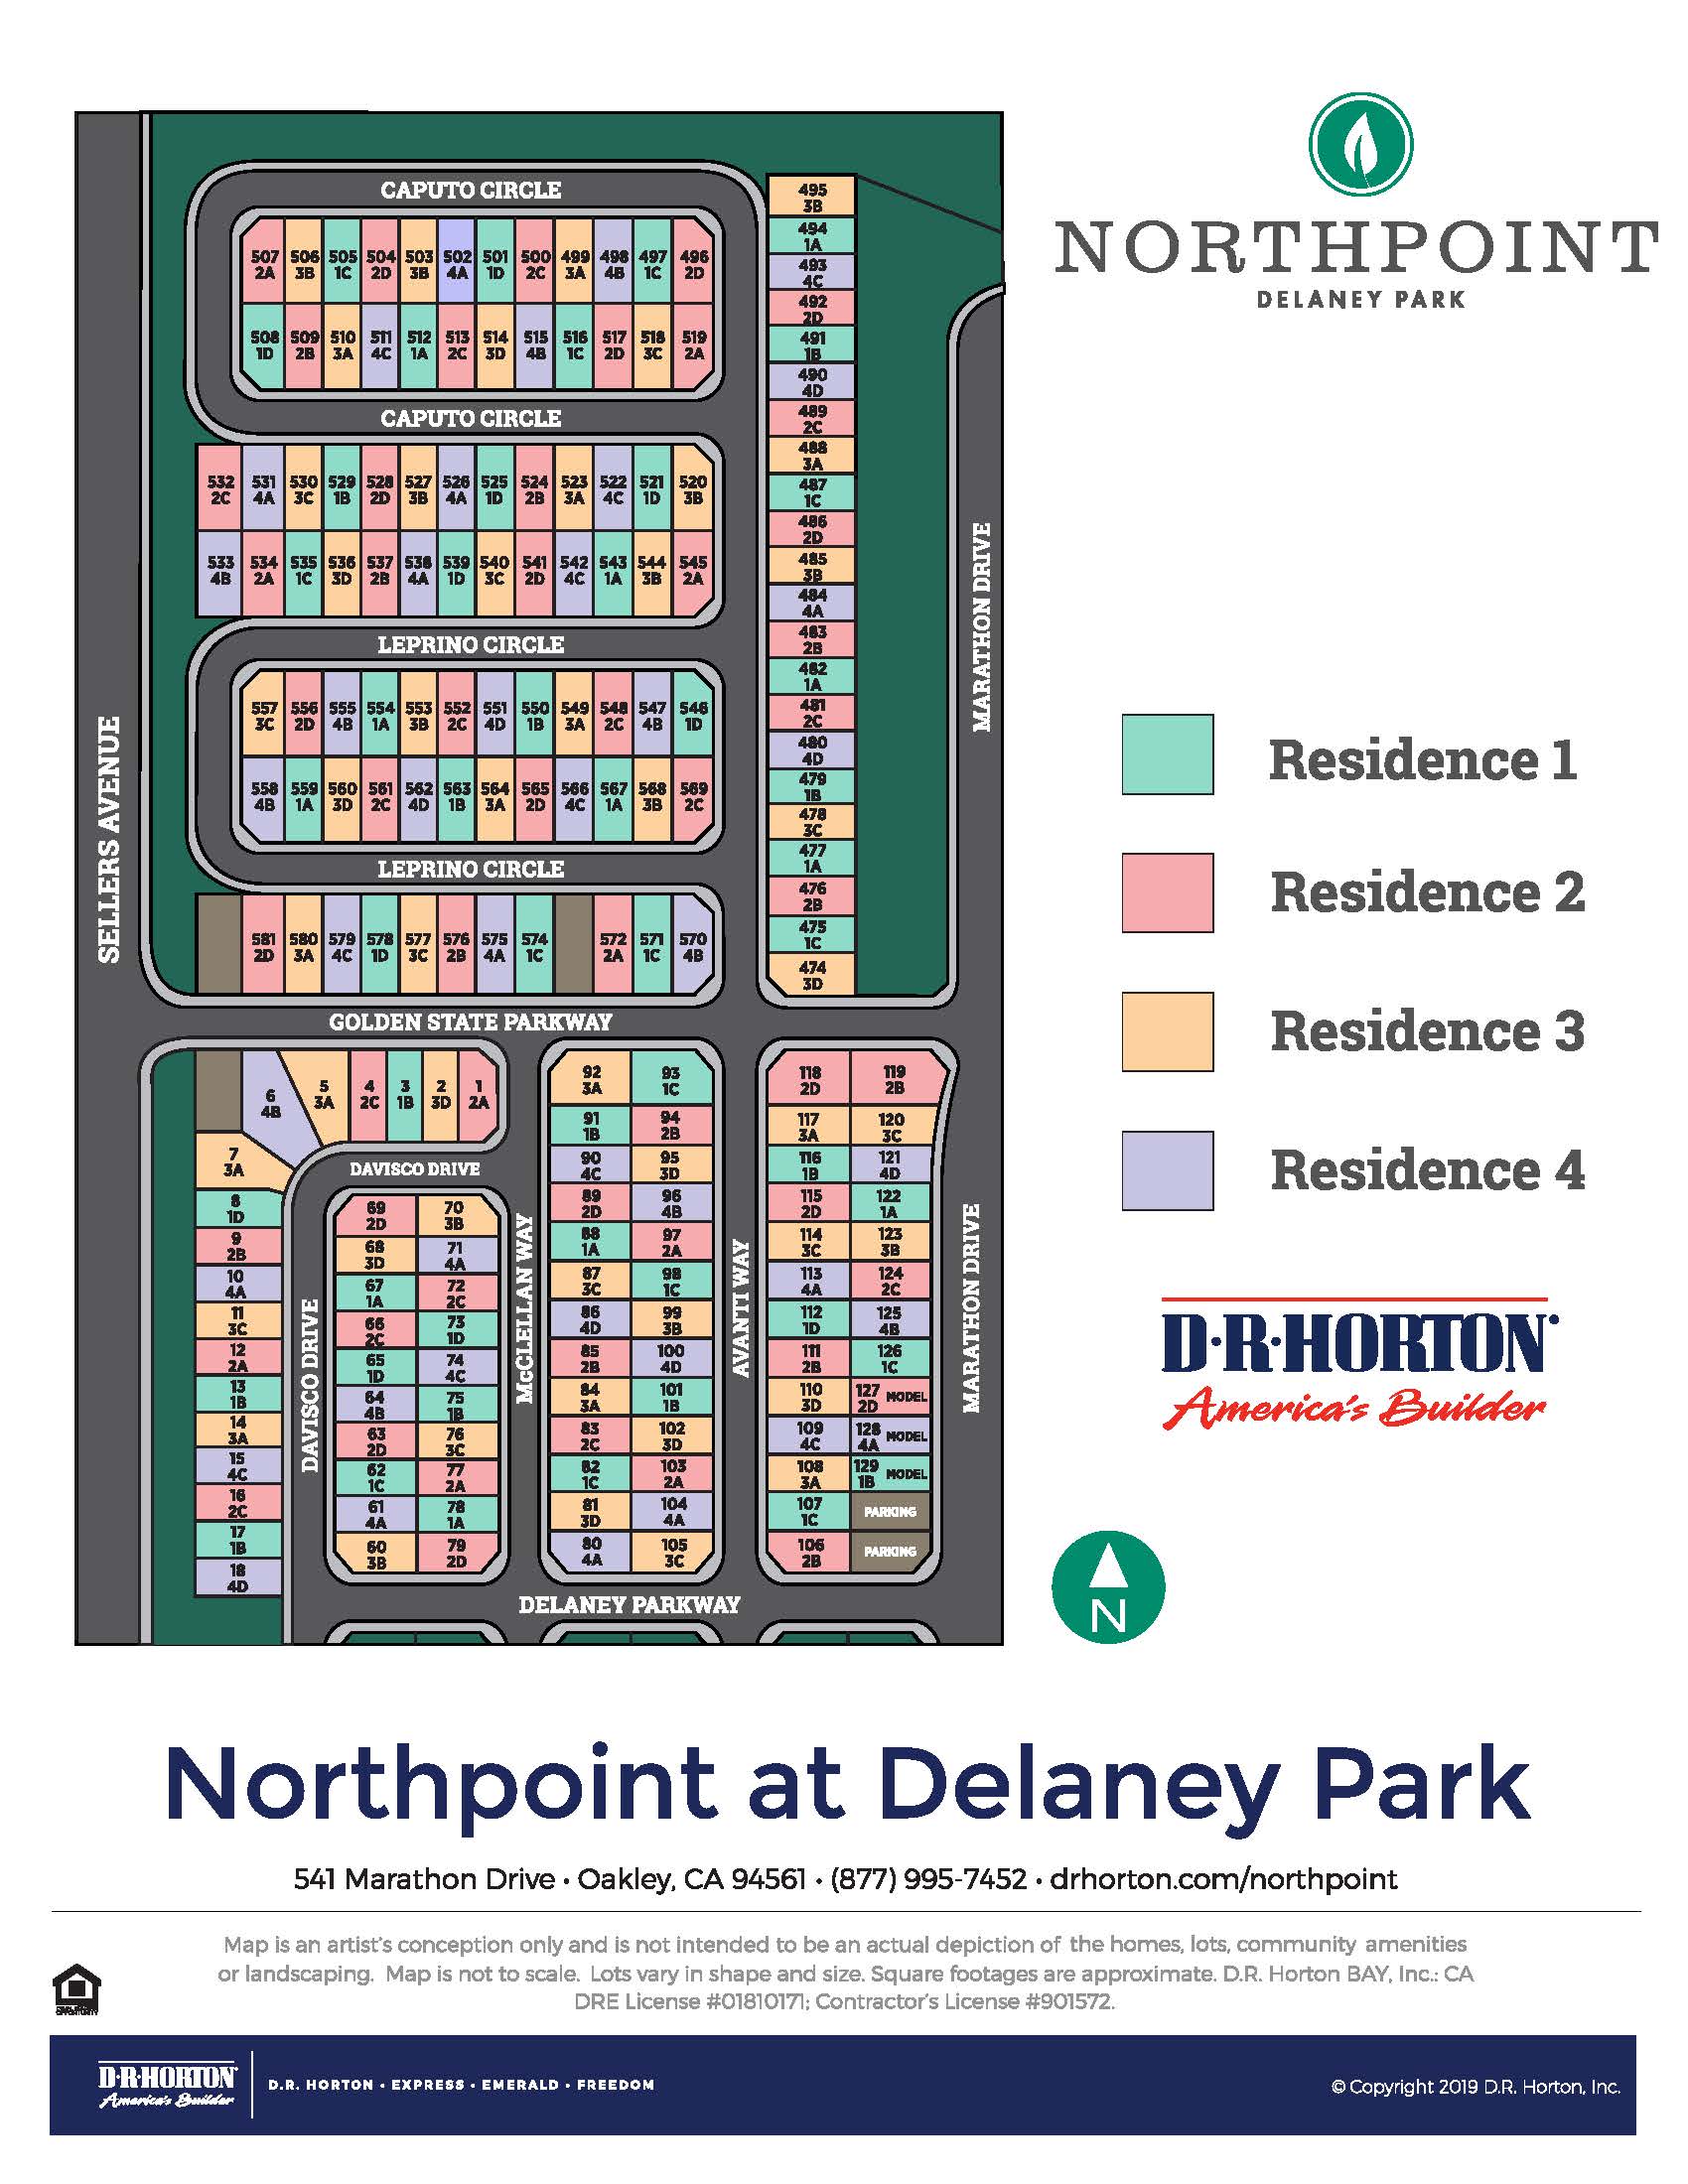 northpoint at delaney park